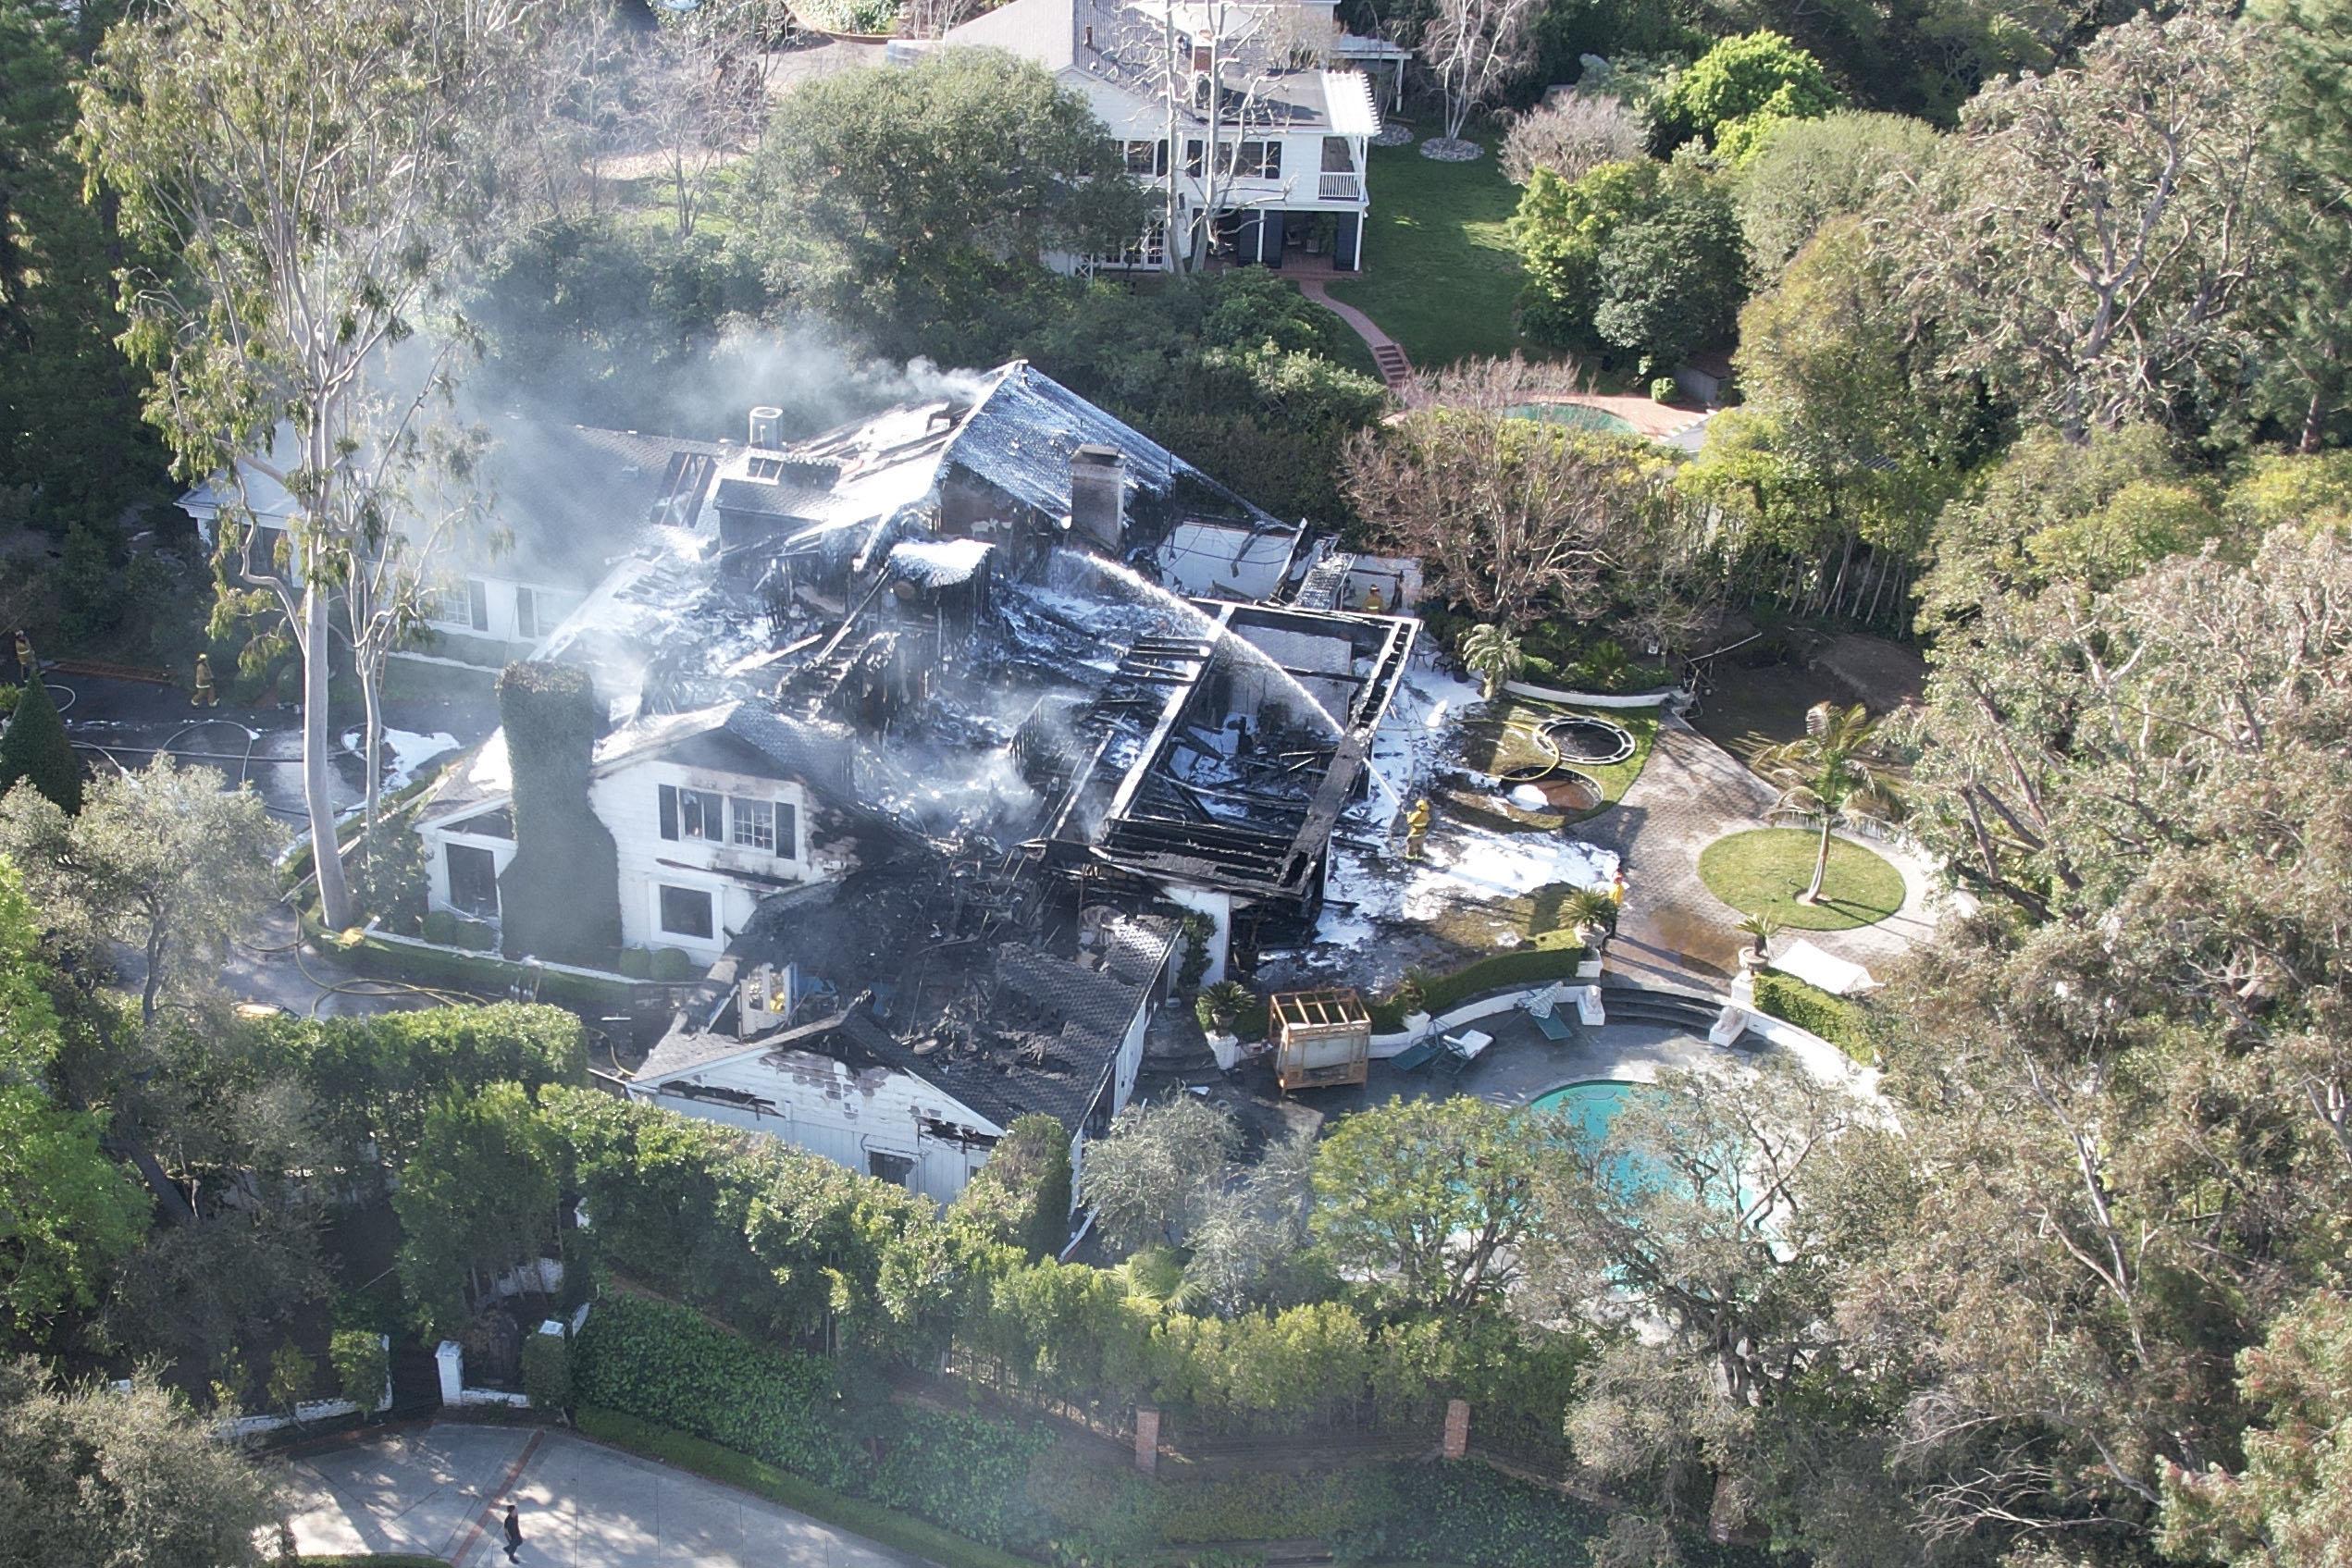 Cause Of Fire That Burned Down Cara Delevingne's $7M Home Revealed